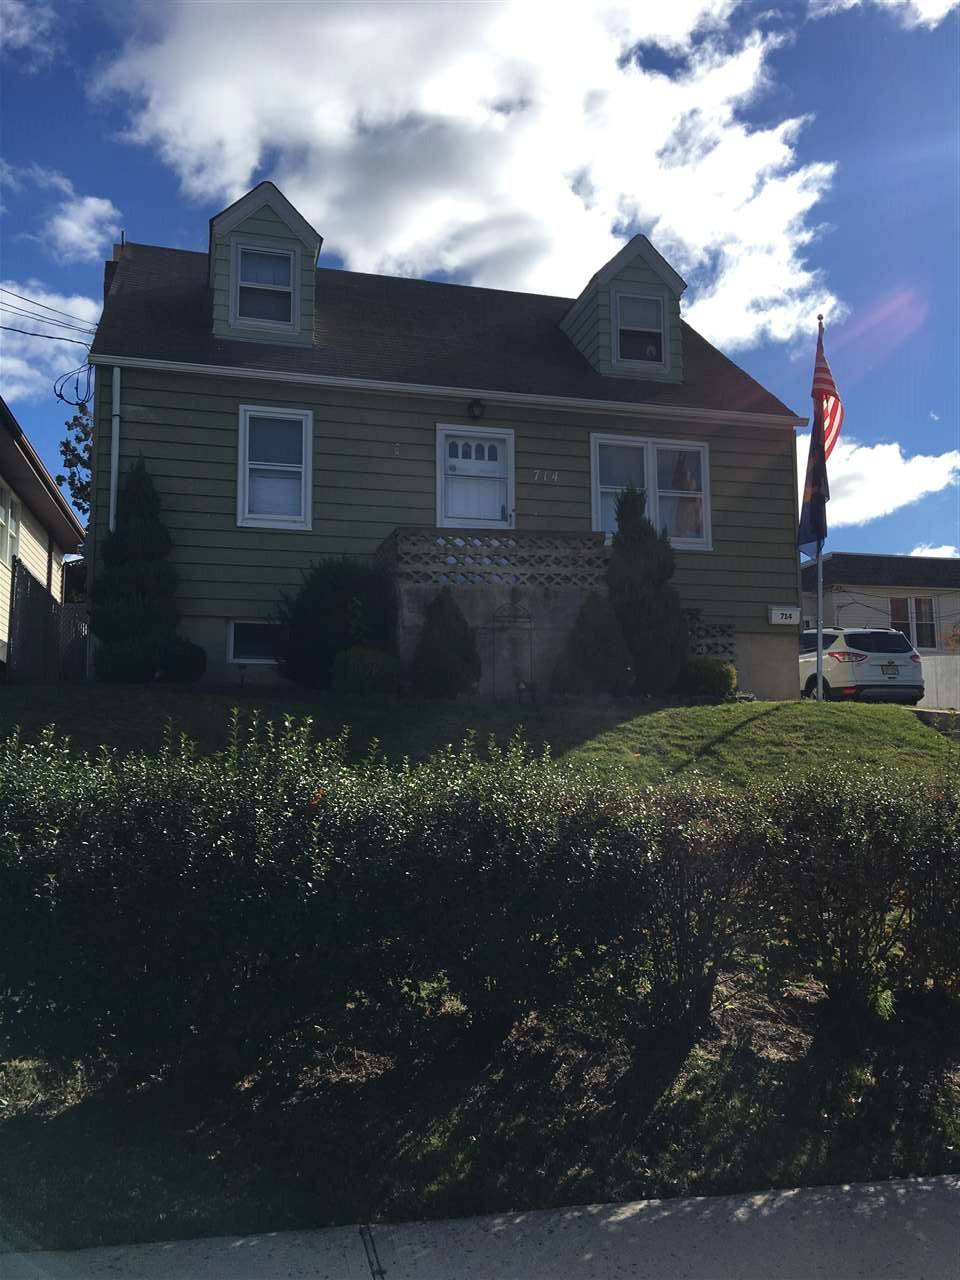 3BR/3FBTH home on 50 x 100 lot in need of significant TLC